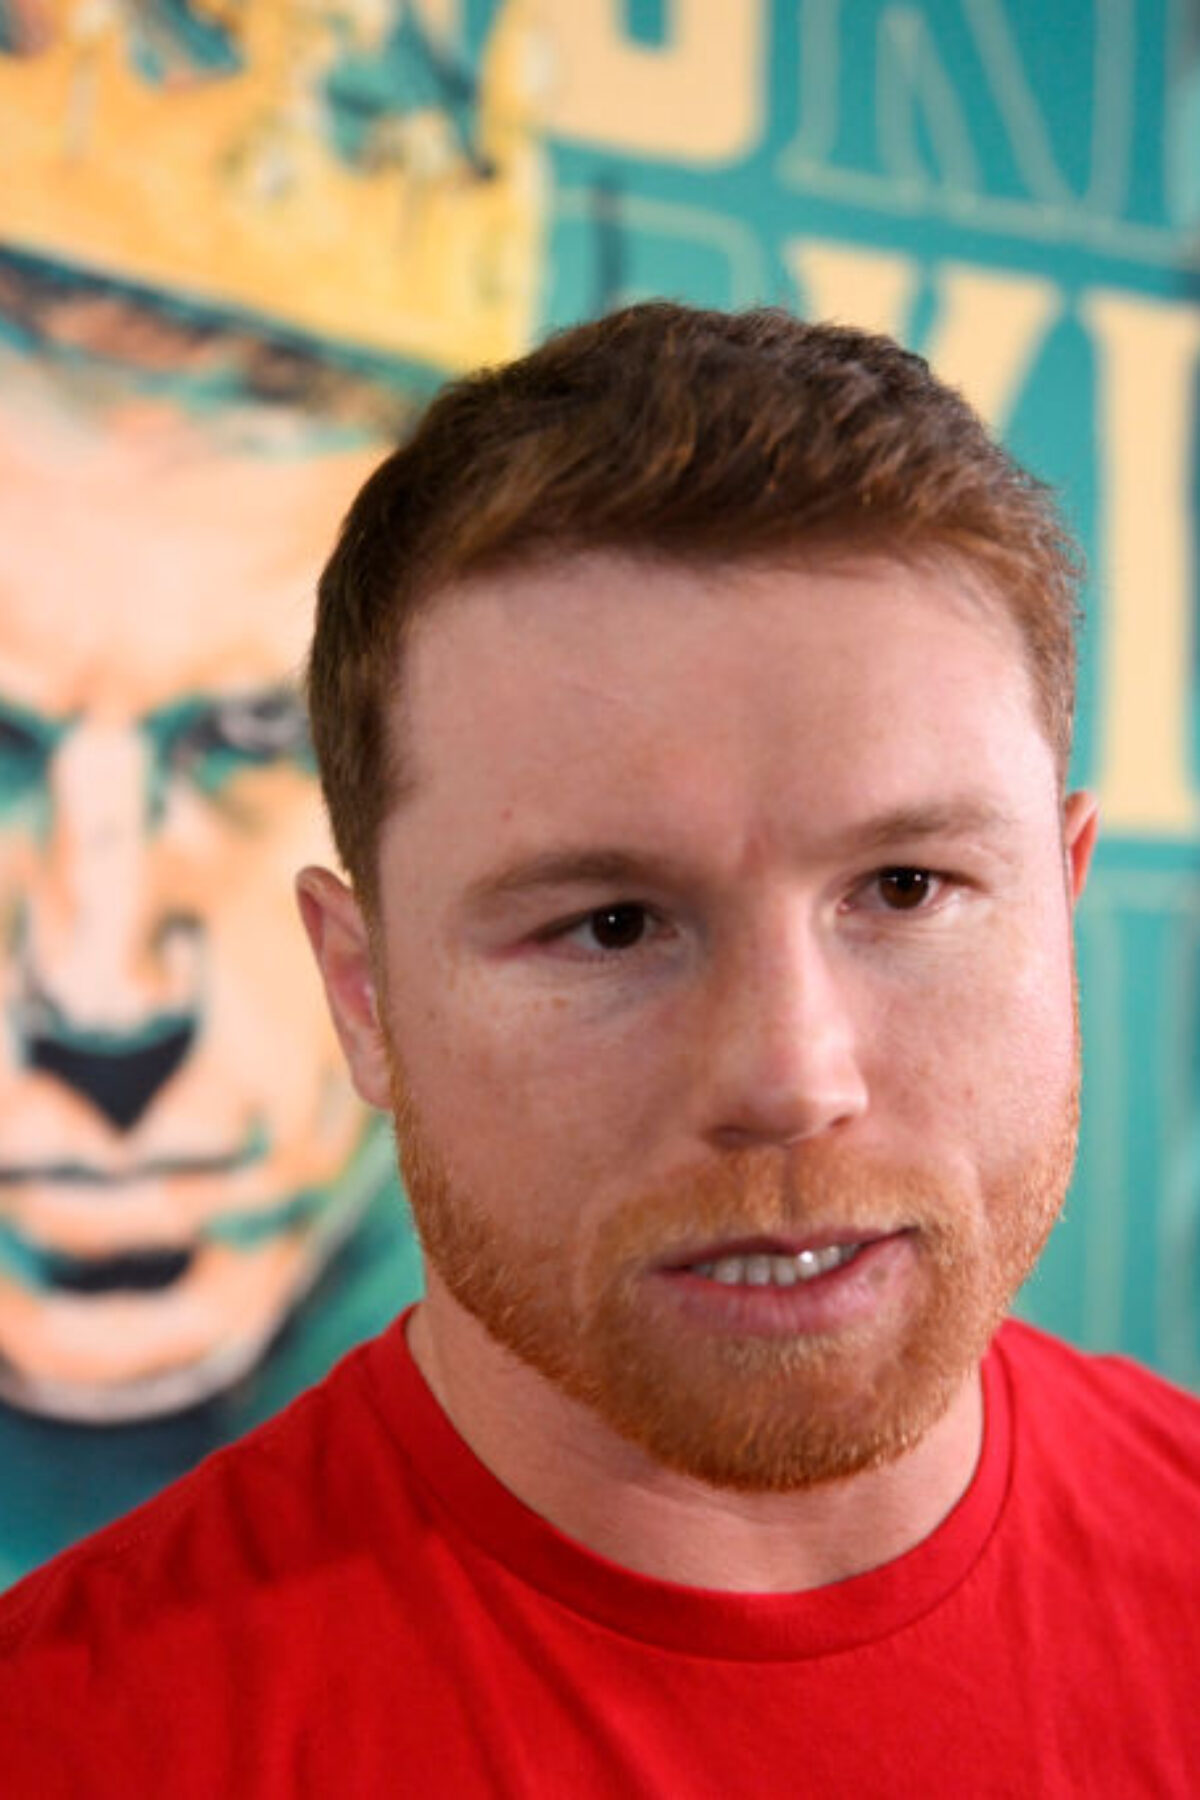 SAN DIEGO, CA - AUGUST 29: Canelo Alvarez does interviews before a media workout at the House of Boxing August 29, 2022 in San Diego, California. (Photo by Denis Poroy/Getty Images)